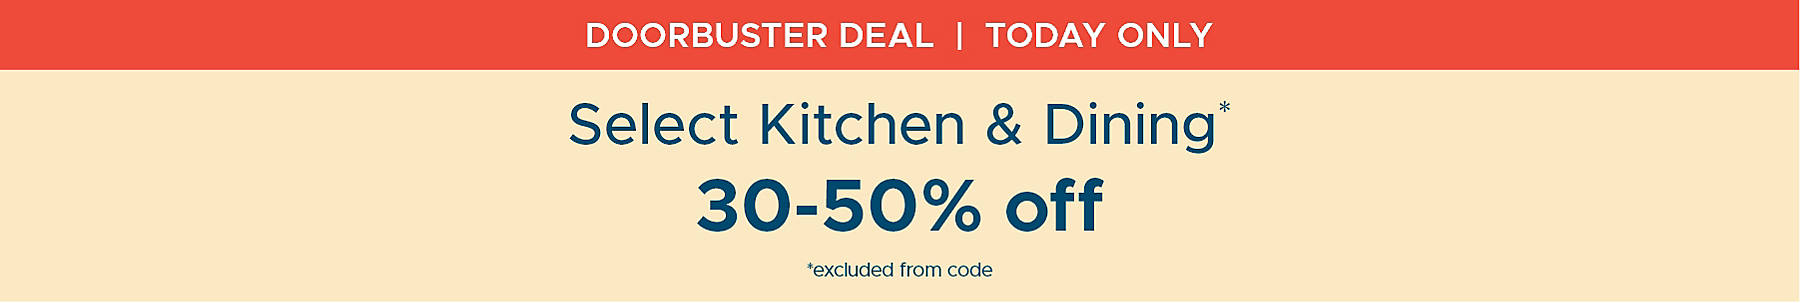 Doorbuster Deal Today Only Select Kitchen & Dining* 30-50% off *excluded from code